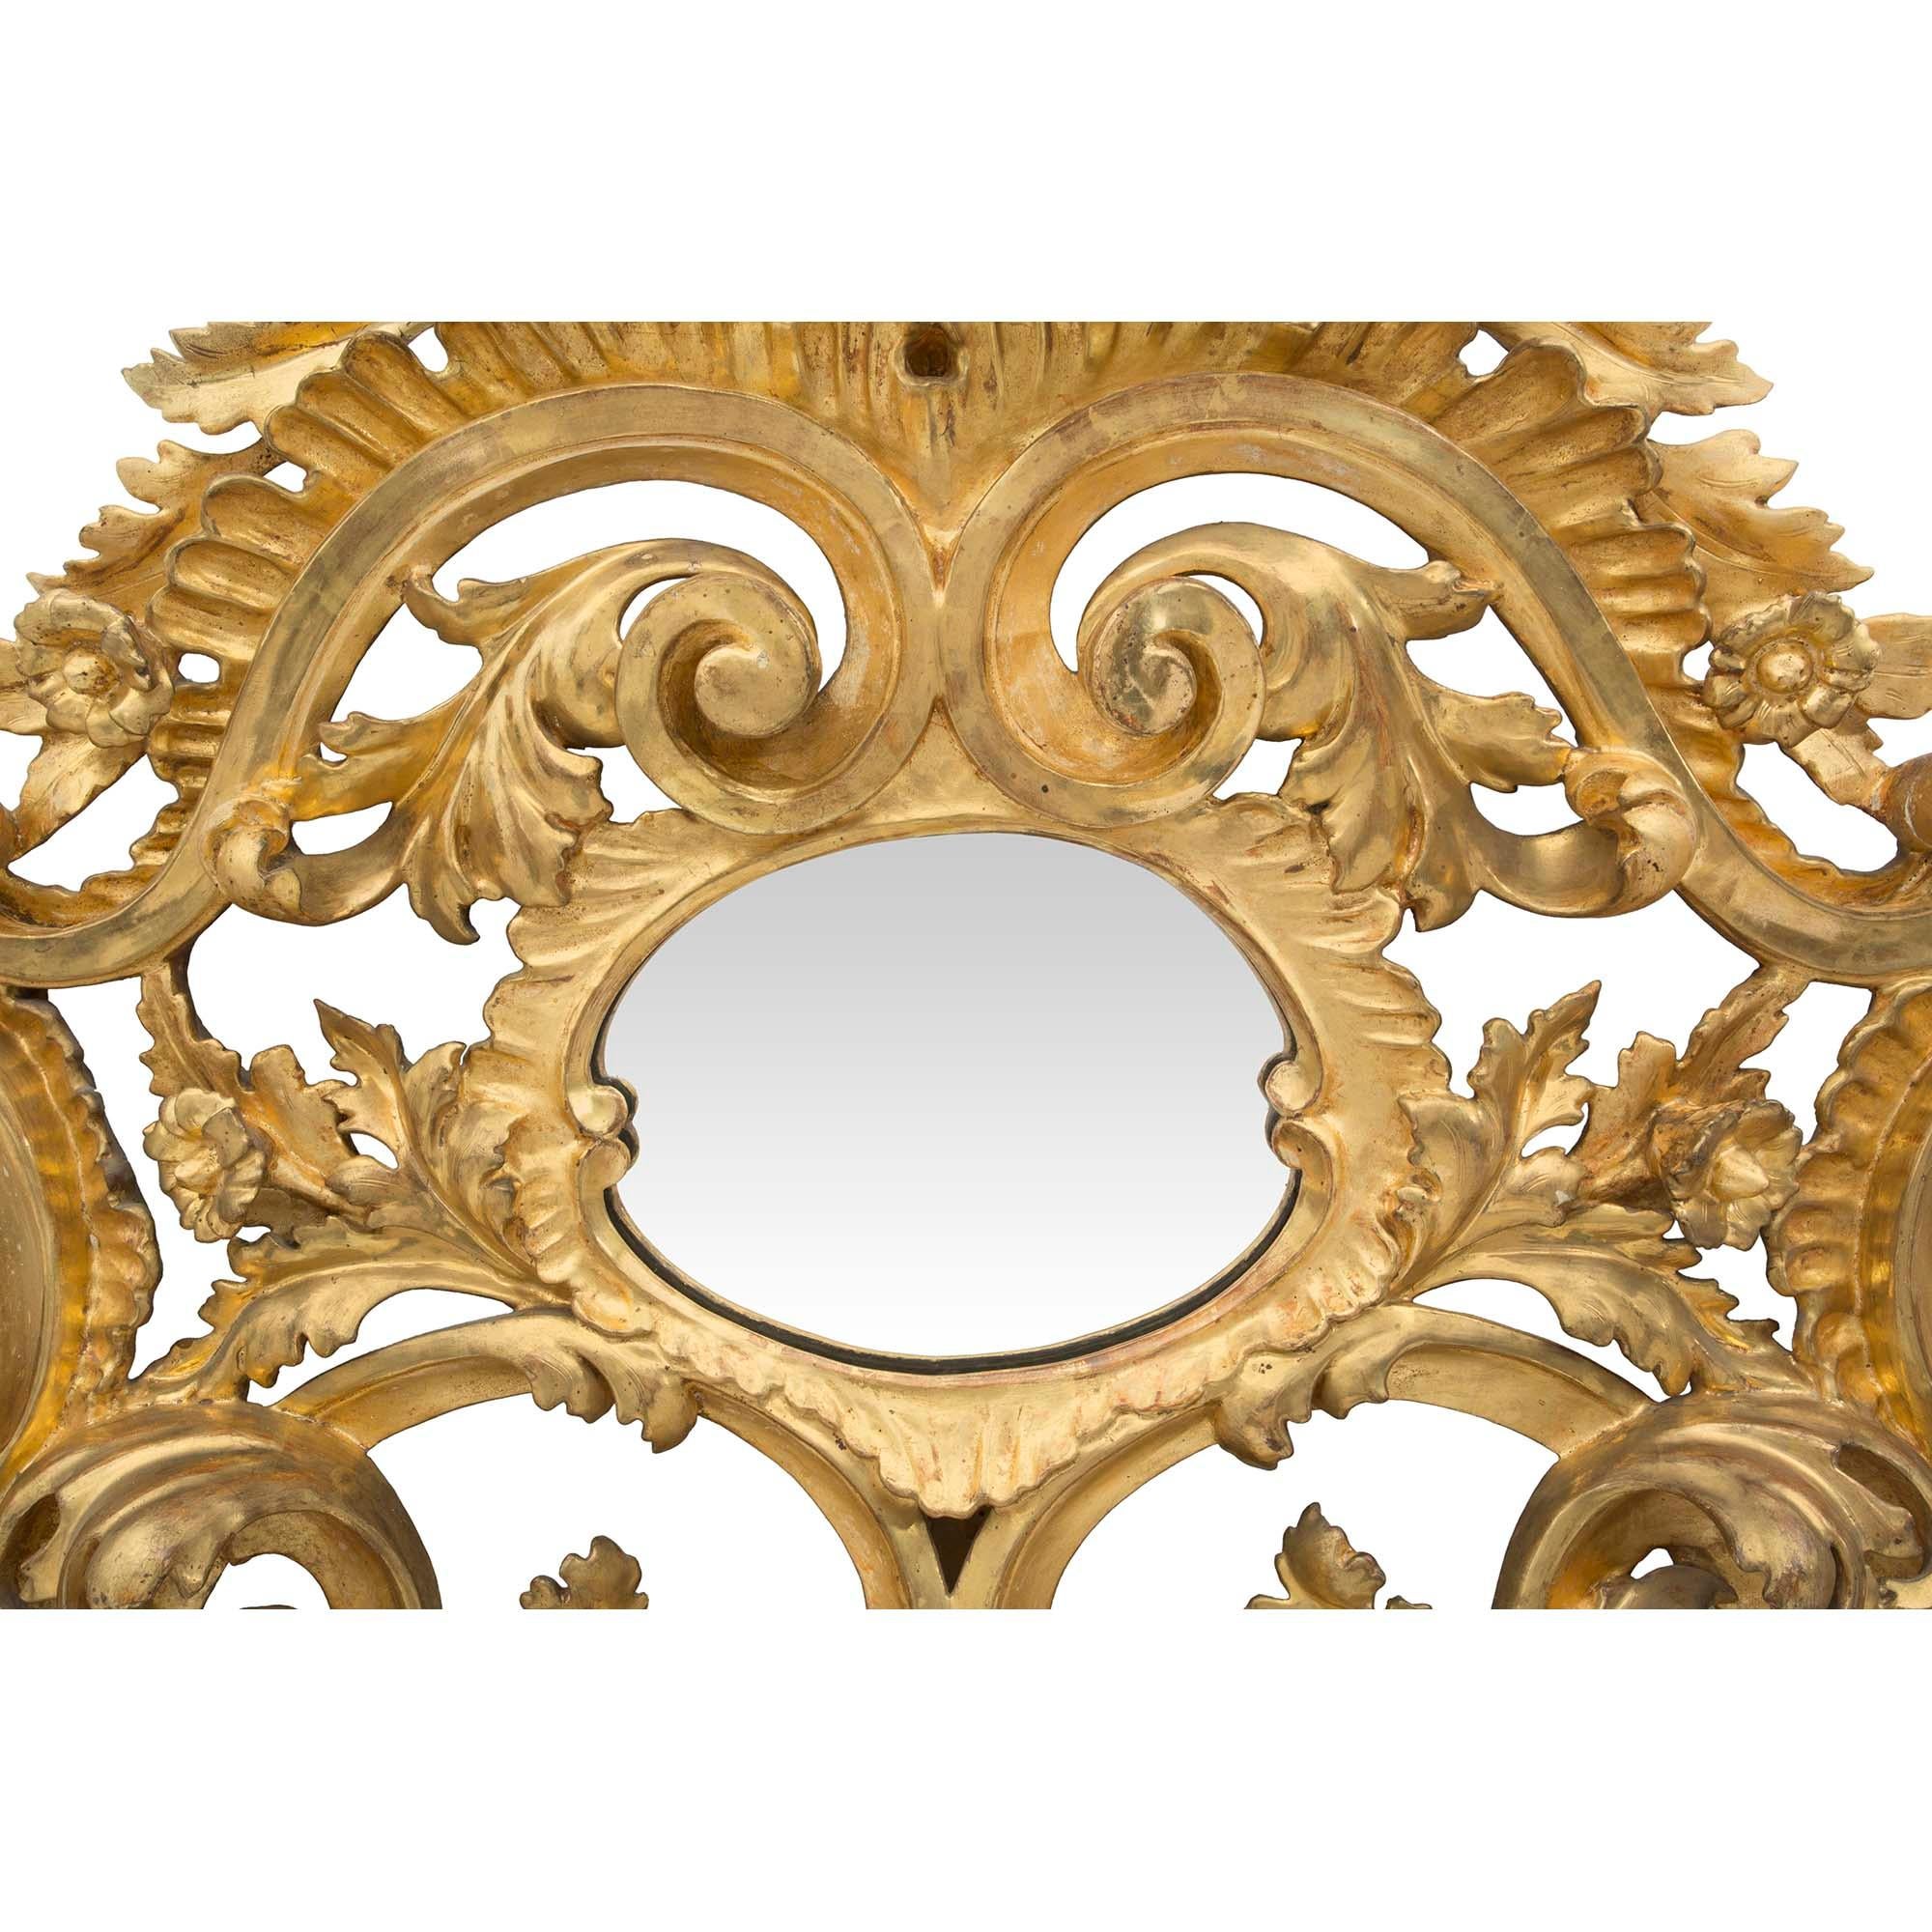 Italian Early 19th Century Baroque Giltwood Mirror For Sale 1